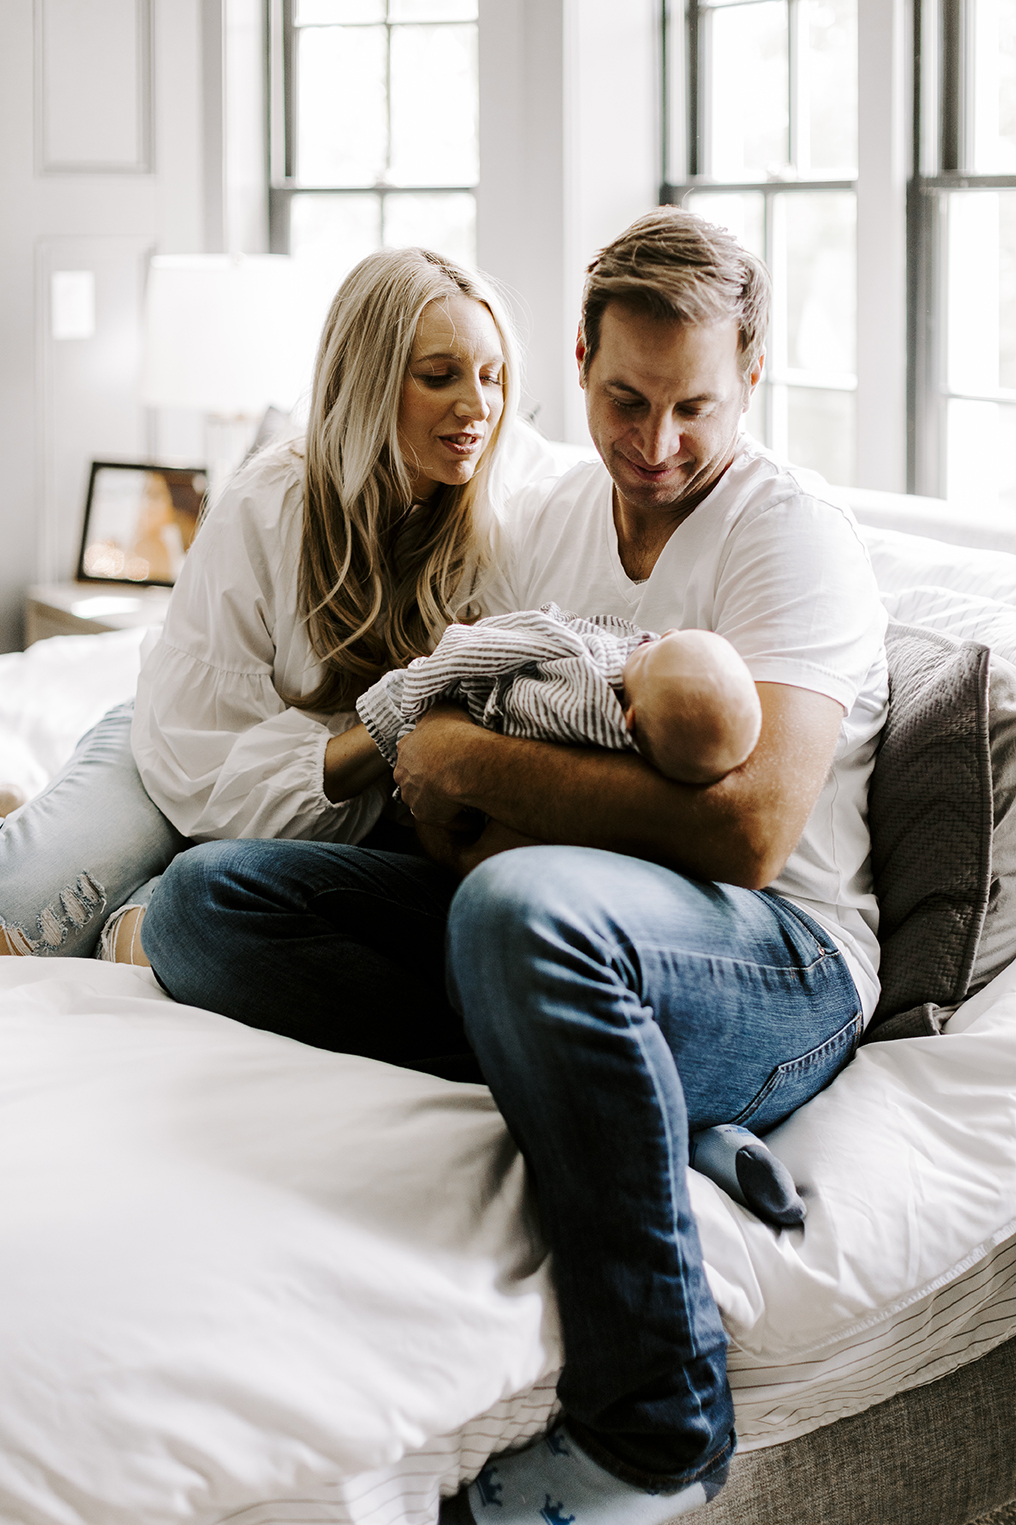 The Roberts family snuggles their new baby during their Kansas City newborn session